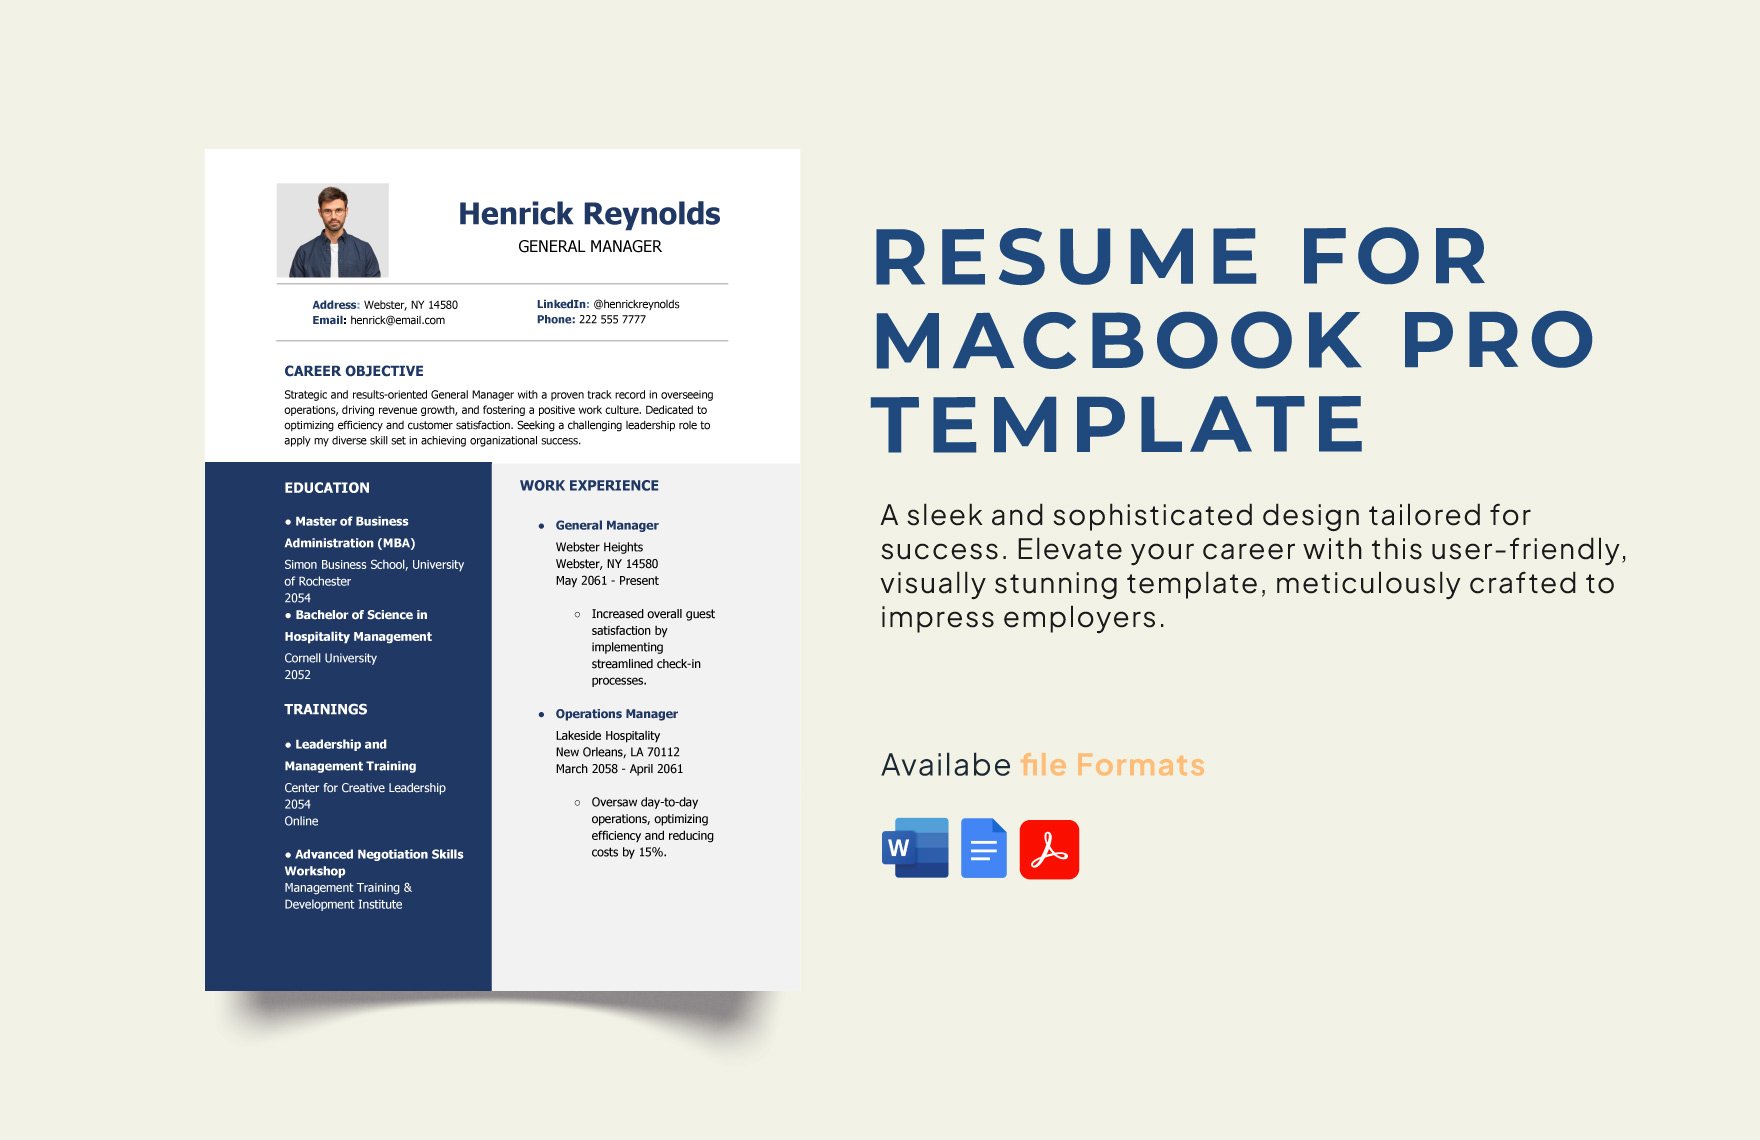 Resume for Macbook Pro Template in Word, Google Docs, PDF, Apple Pages, InDesign